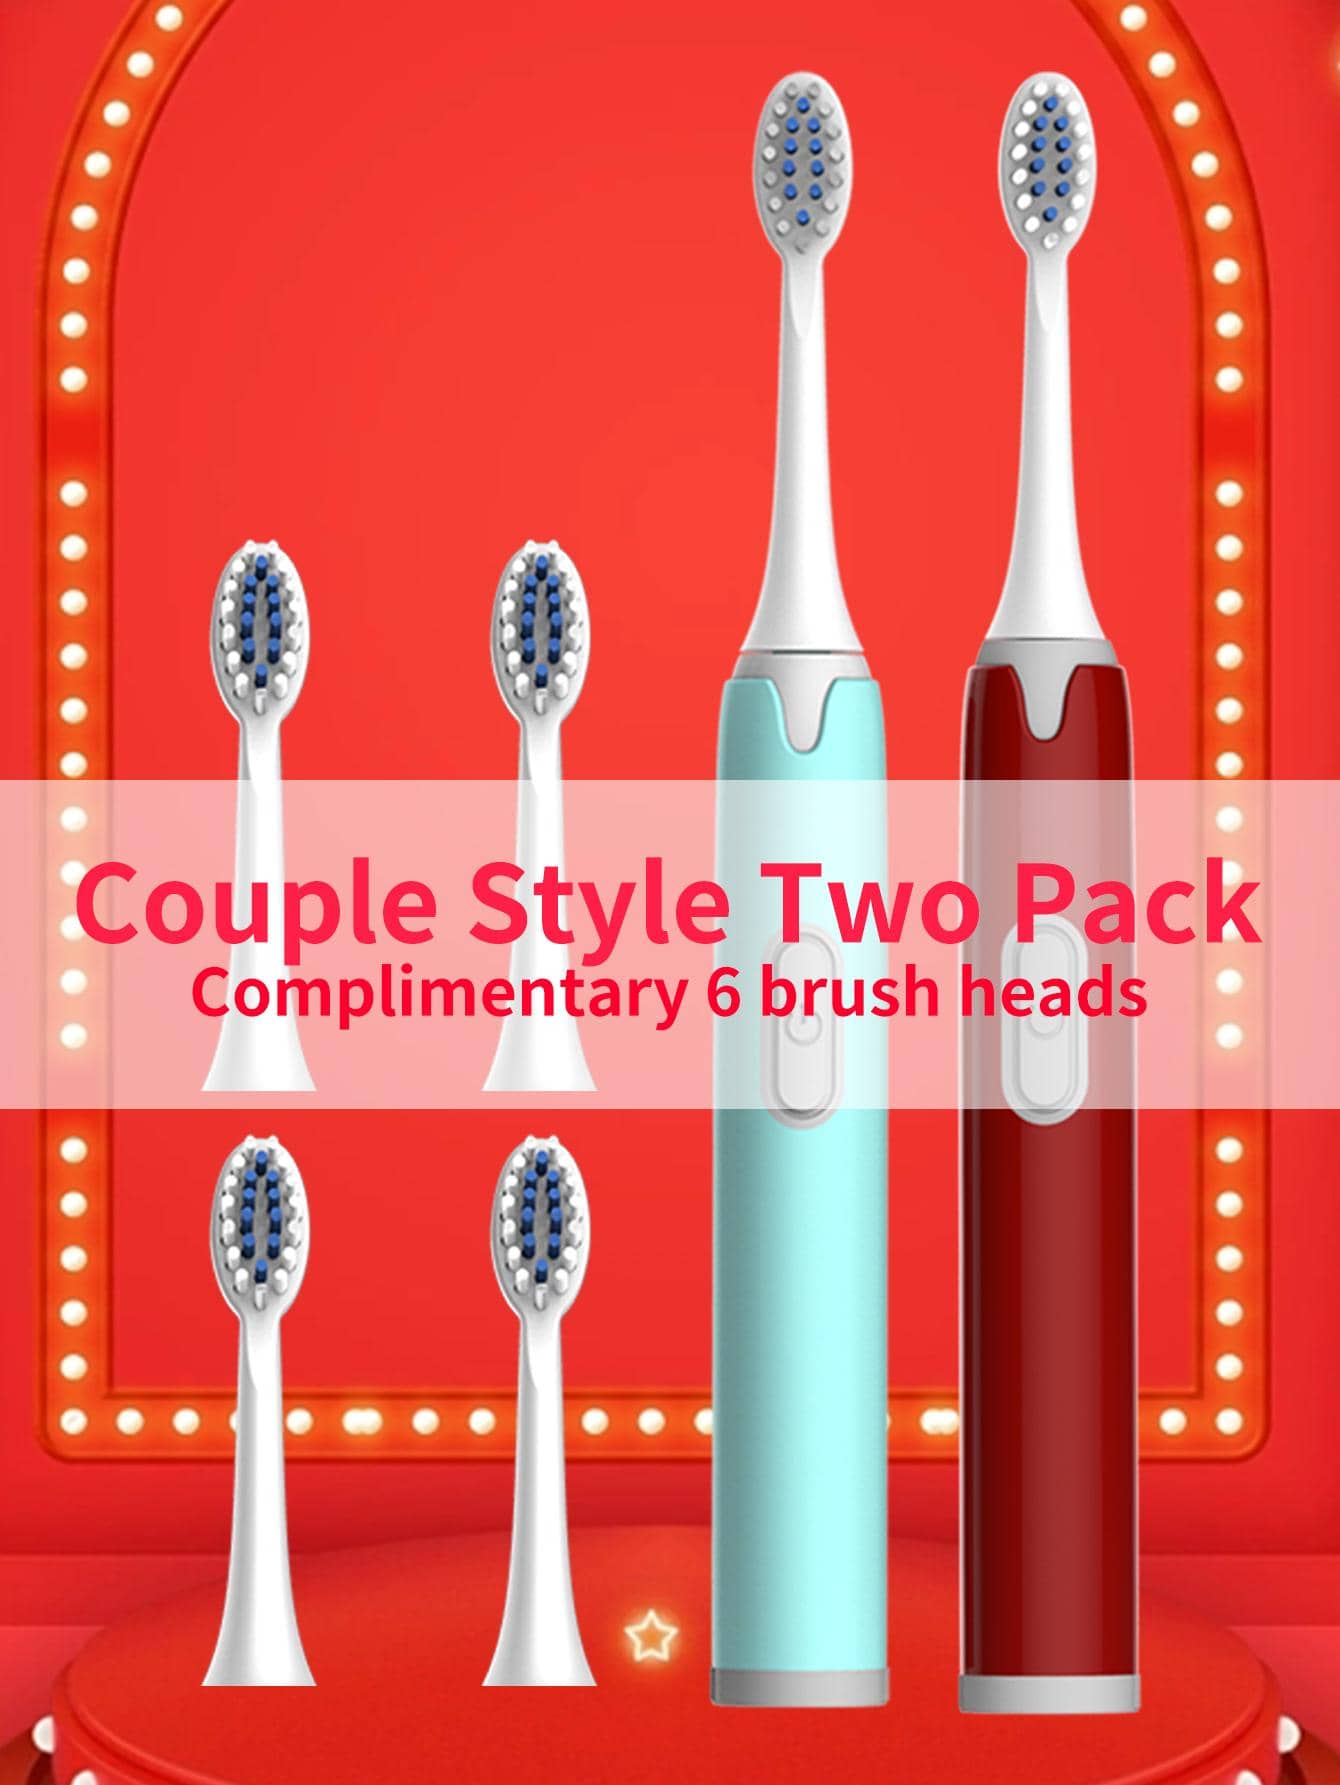 2pcs/set PP Electric Toothbrush & 6pcs Replacement Toothbrush Head, Modern Two Tone Waterproof Portable Electric Toothbrush For Birthday Gift